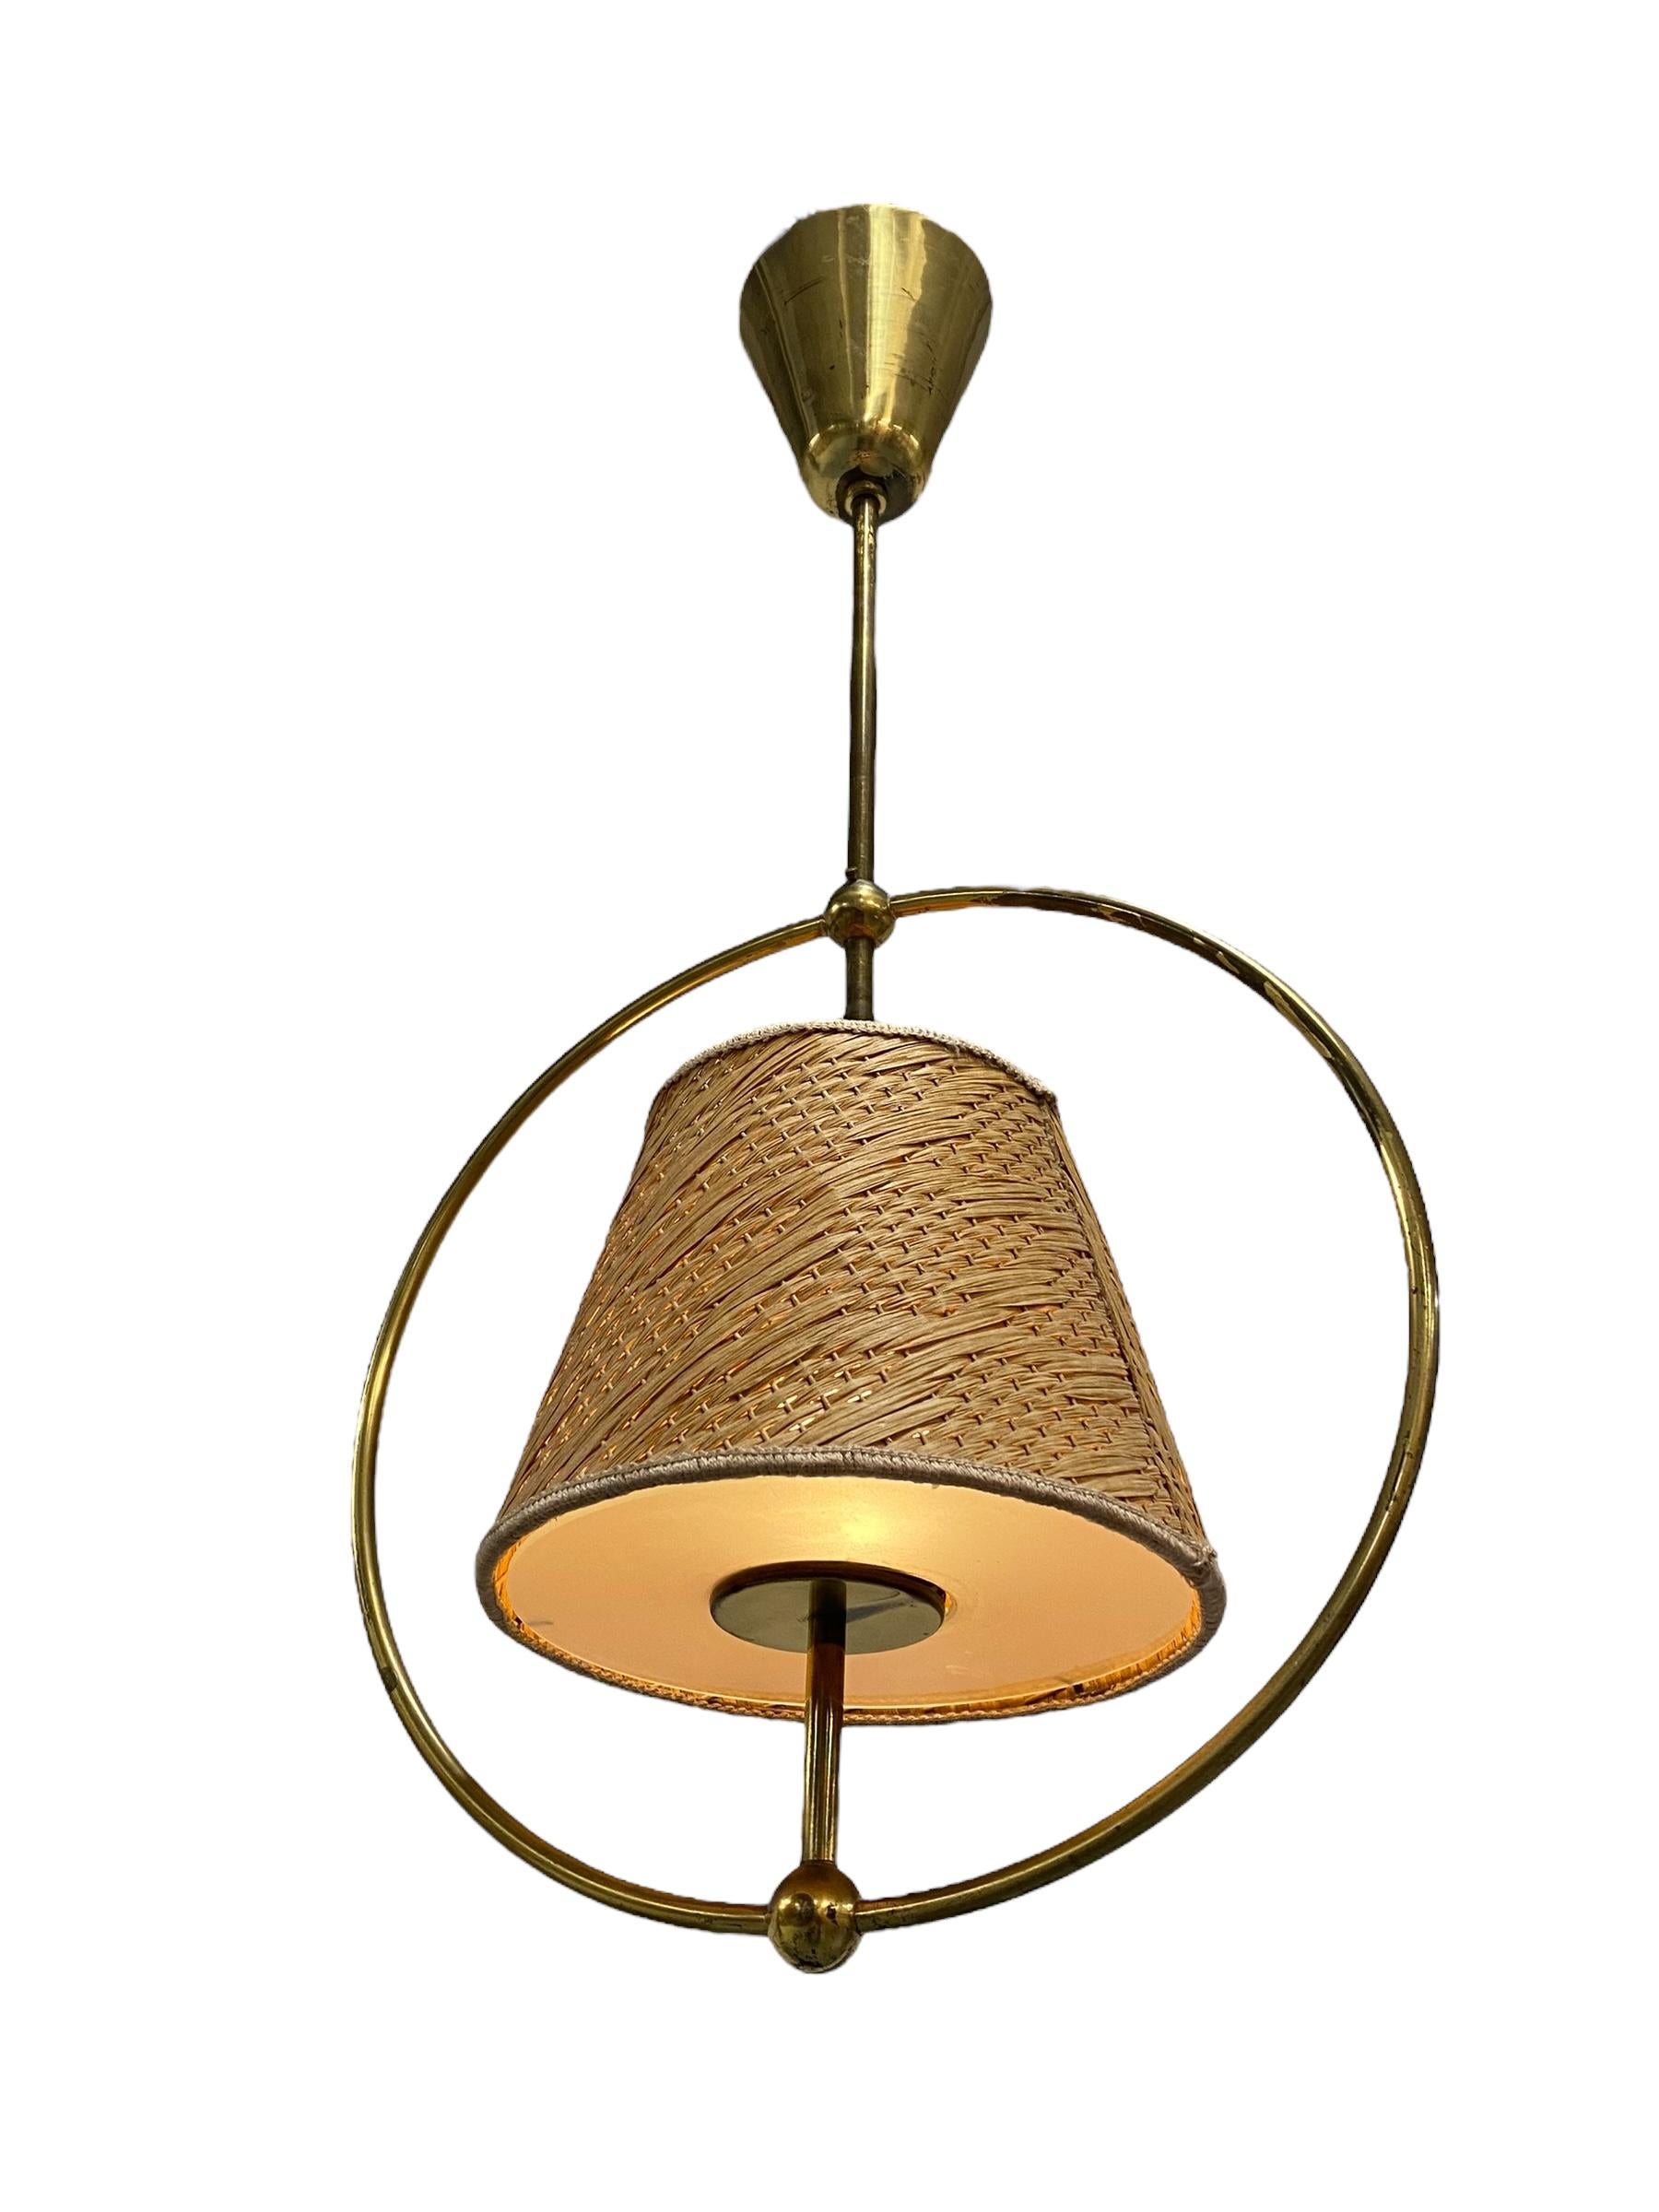 Maria Lindeman Ceiling Lamp Model. 50591, 1950s For Sale 1